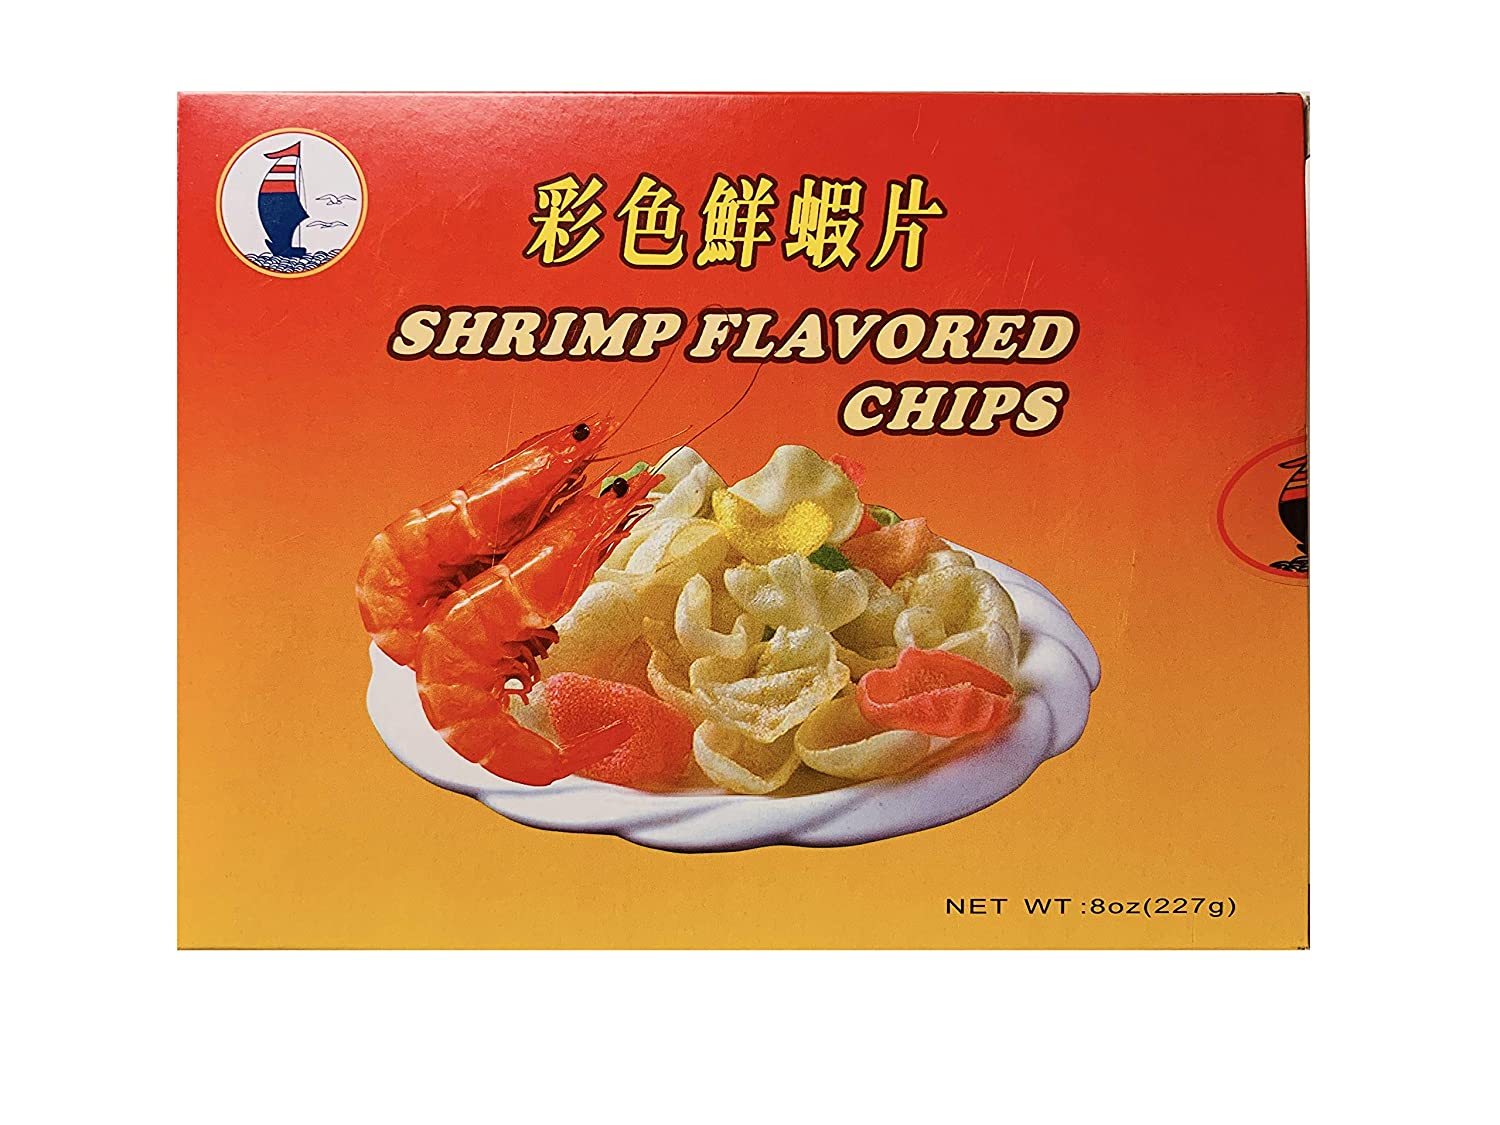 Primary image for Hocean Shrimp Flavored Chips 8 Ounce Box